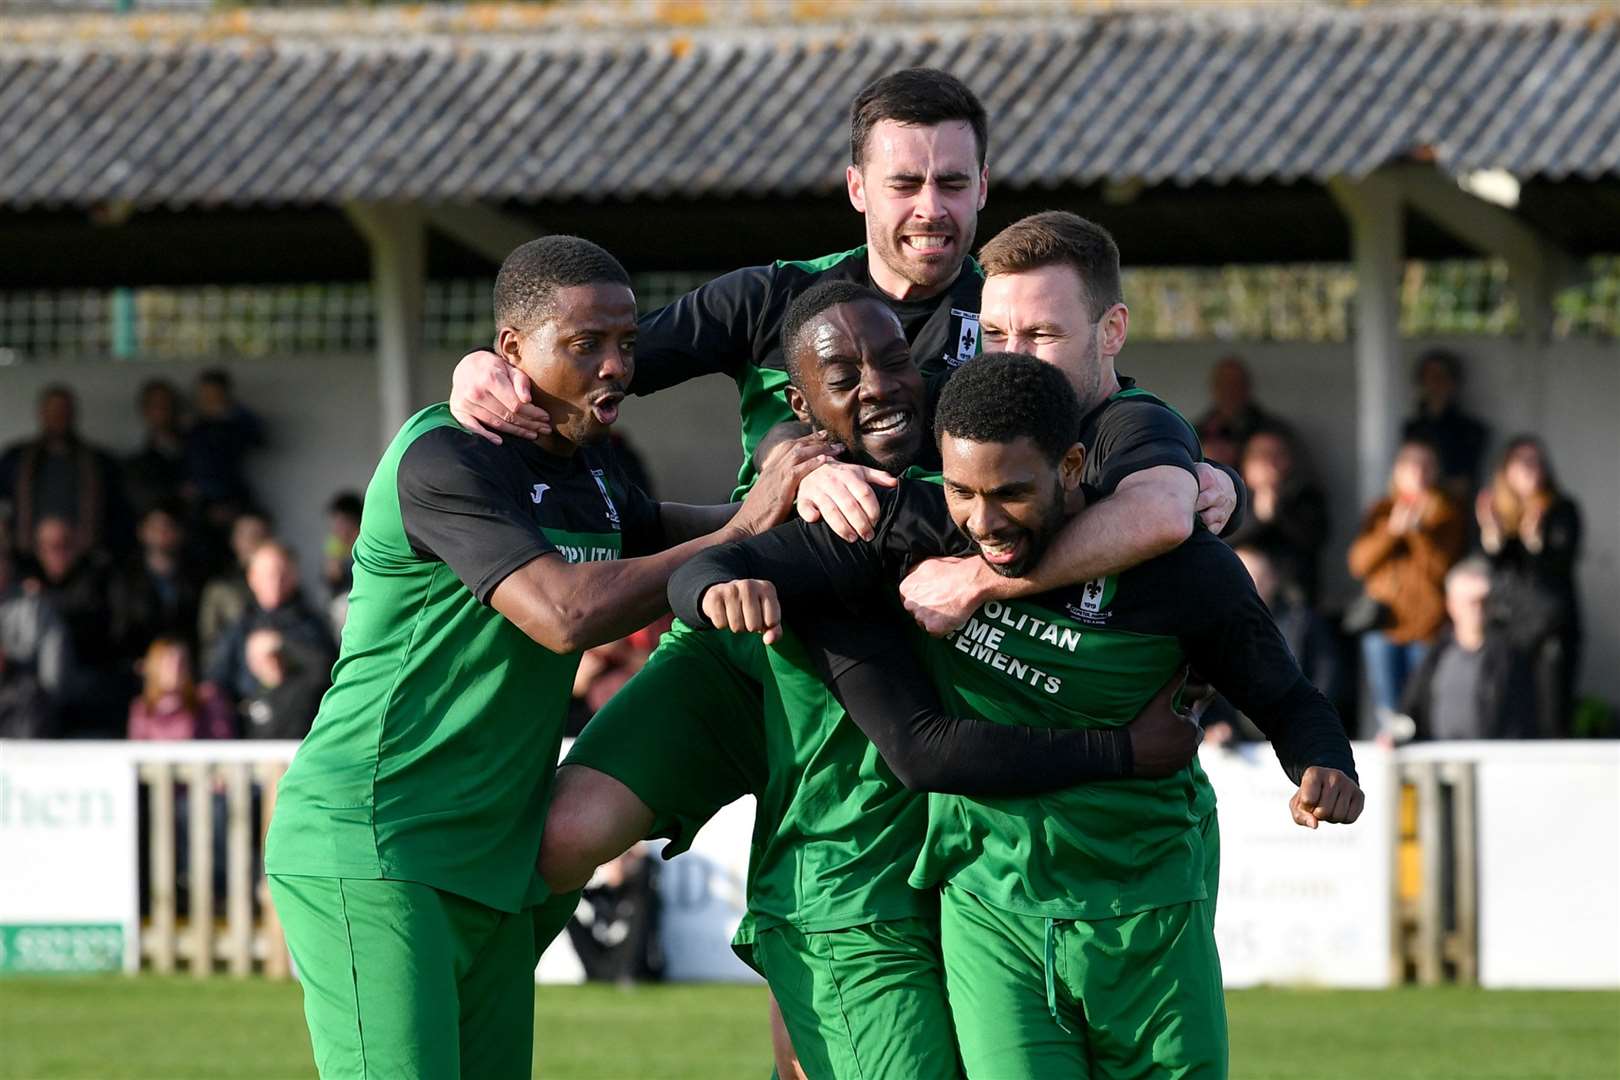 Cray Valley's players celebrate their semi-final win over Canterbury City Picture: Keith Gillard